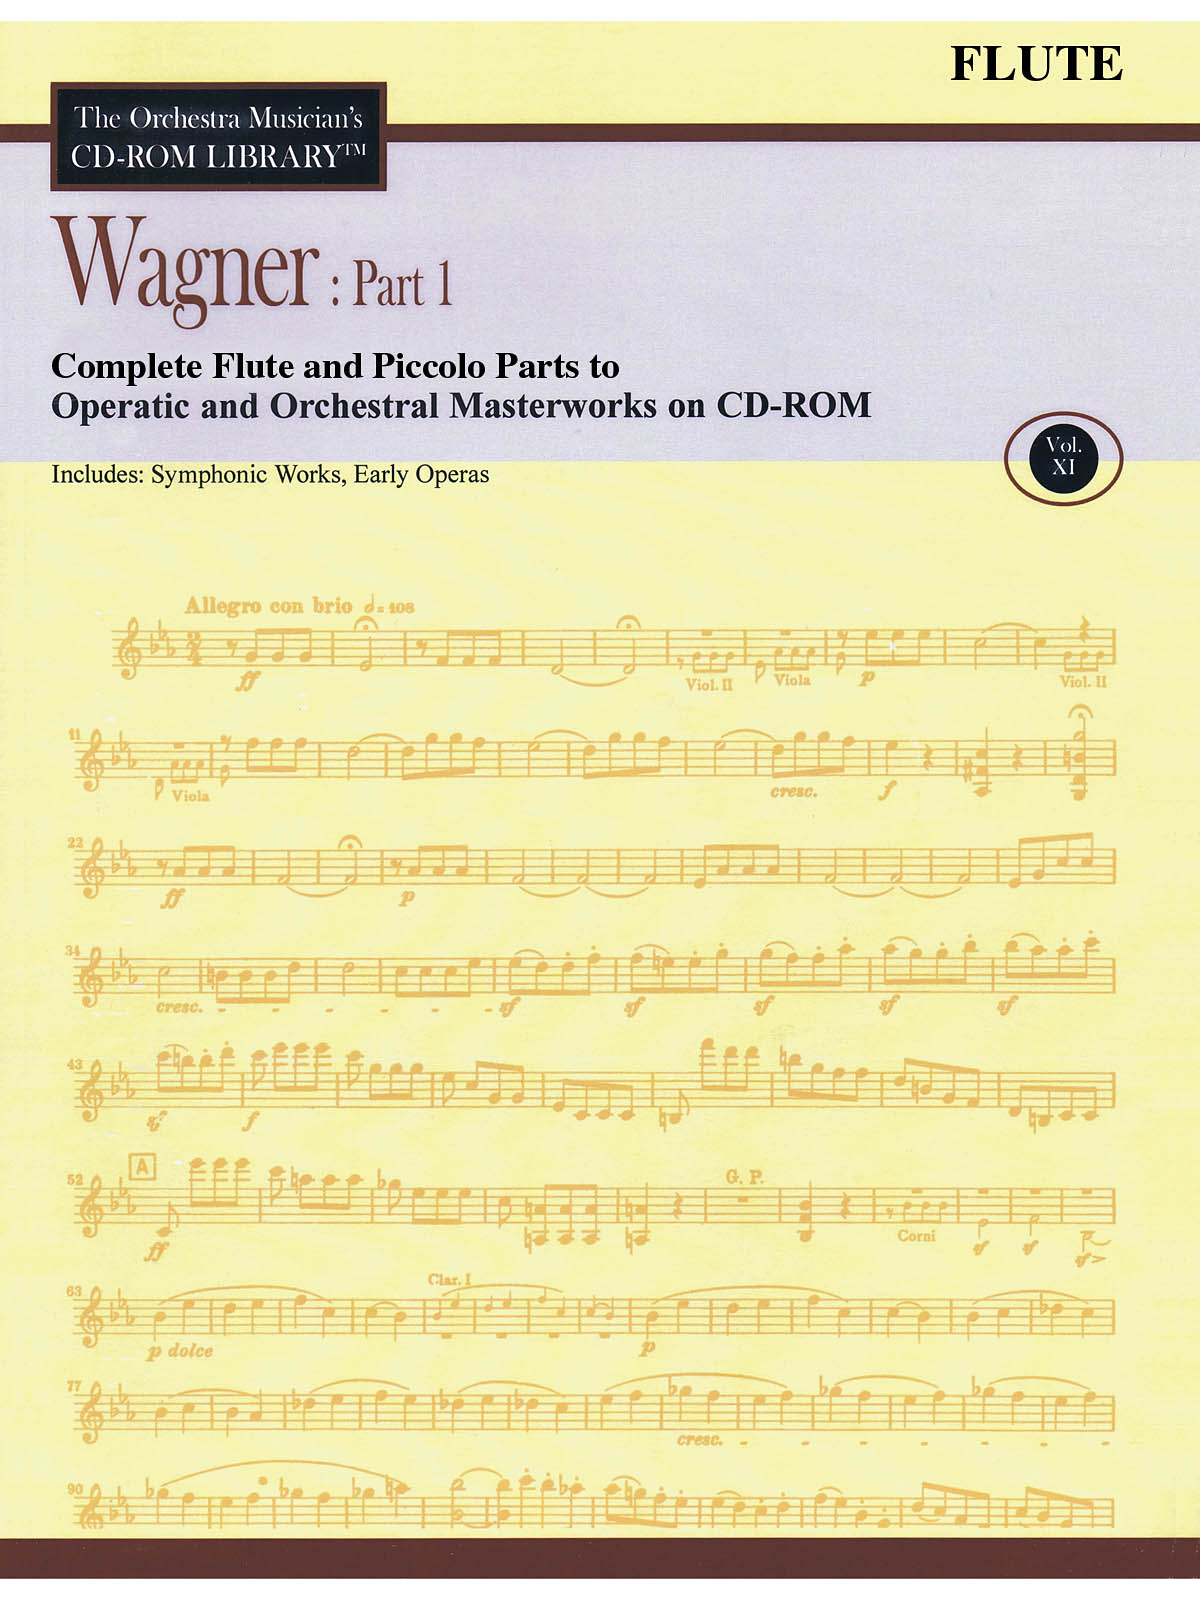 Wagner: Part 1 – Volume 11(The Orchestra Musician’s CD-ROM Library – Flute)